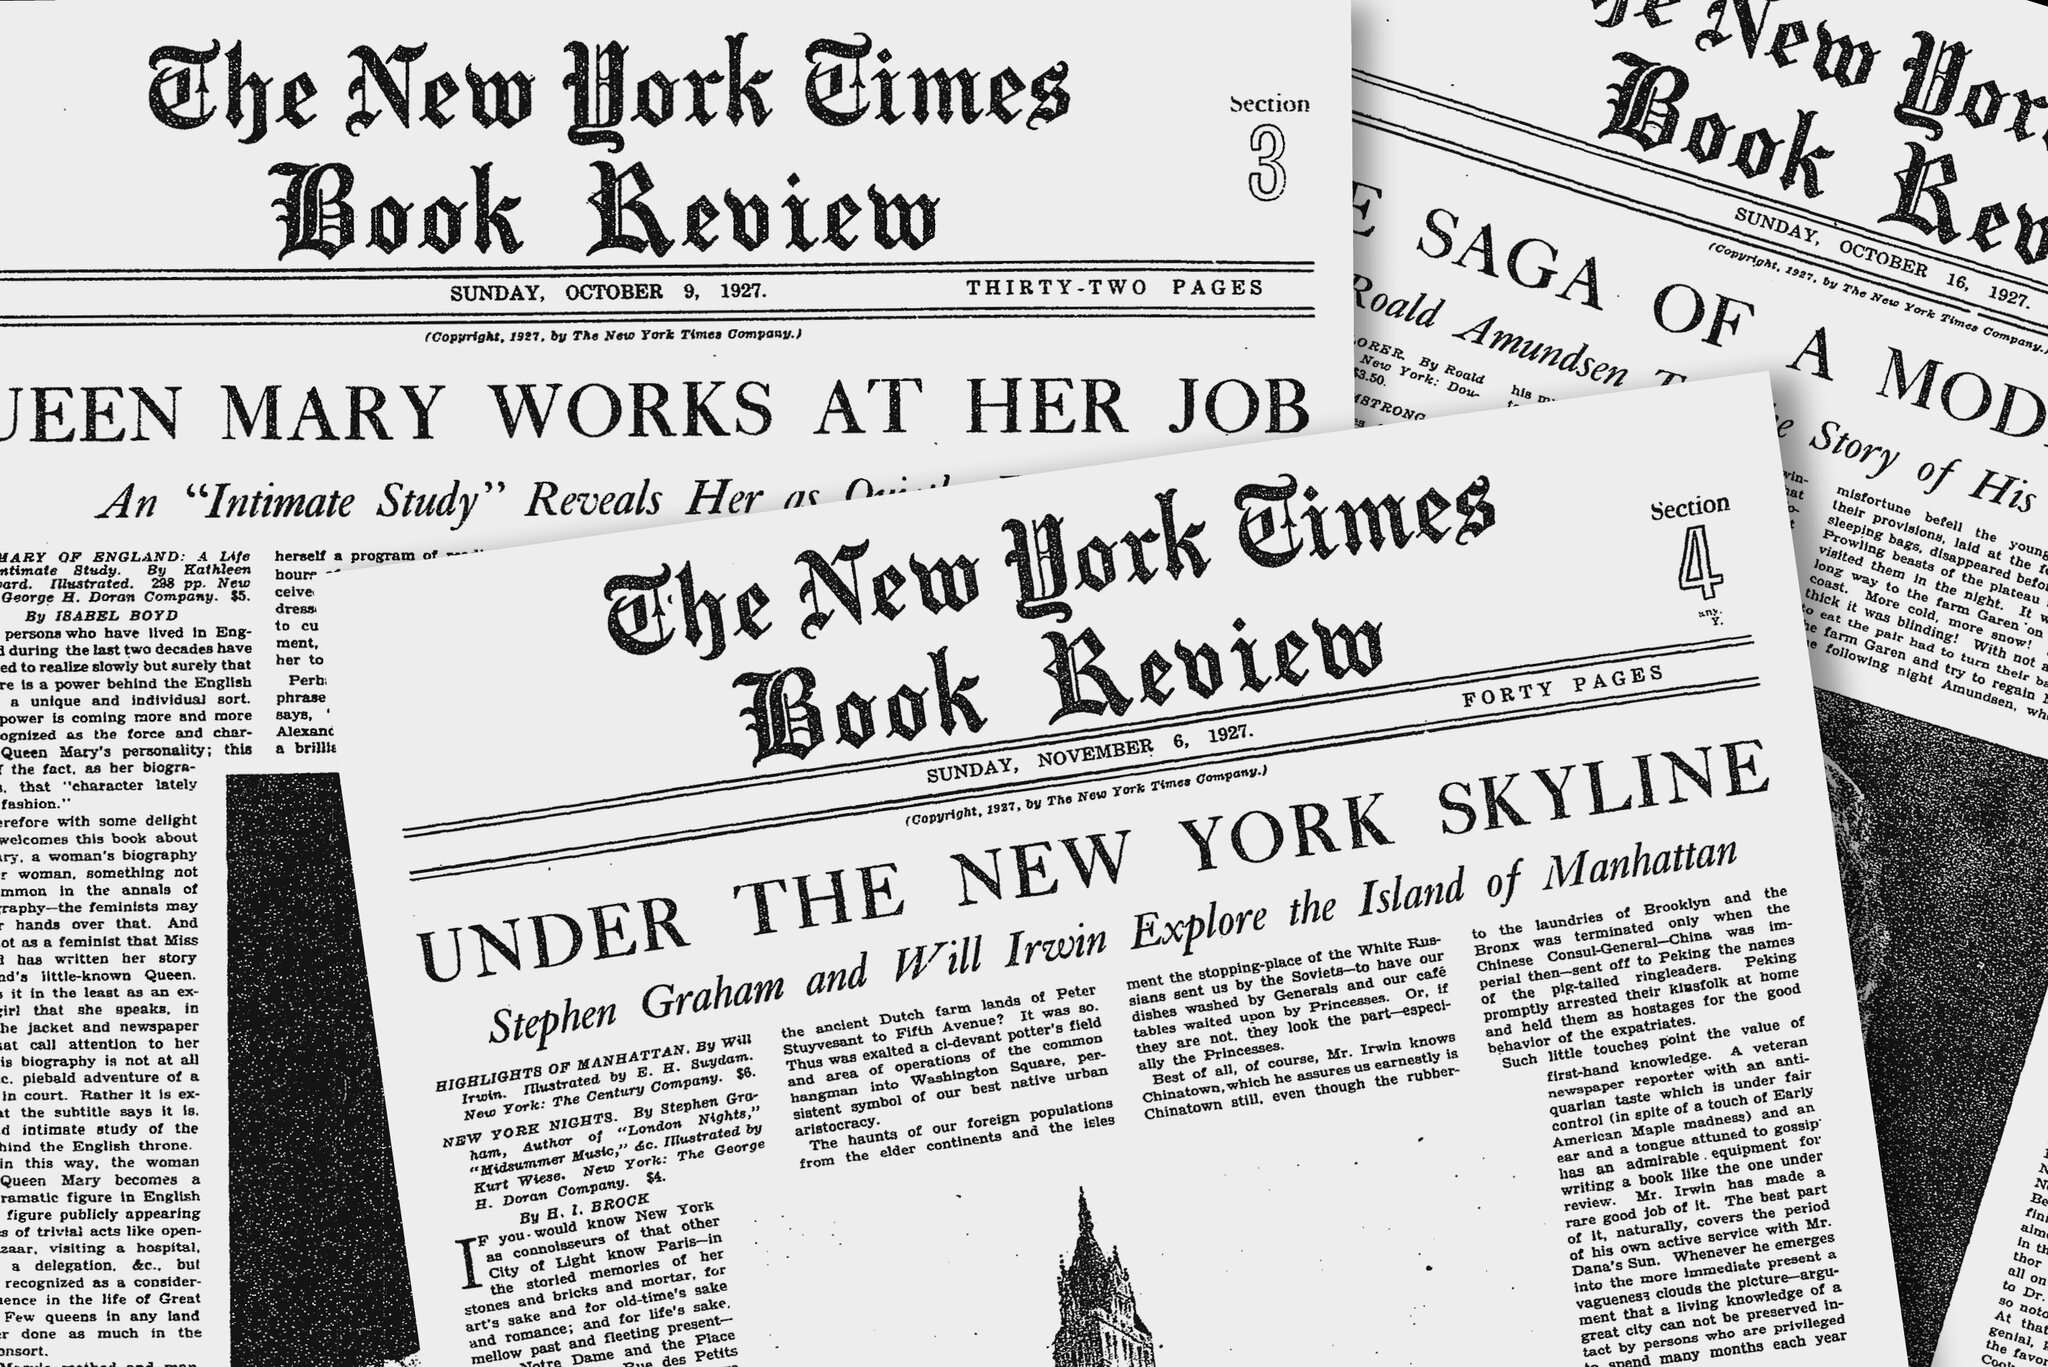 The New York Times Book Review, a monument to literary supplements